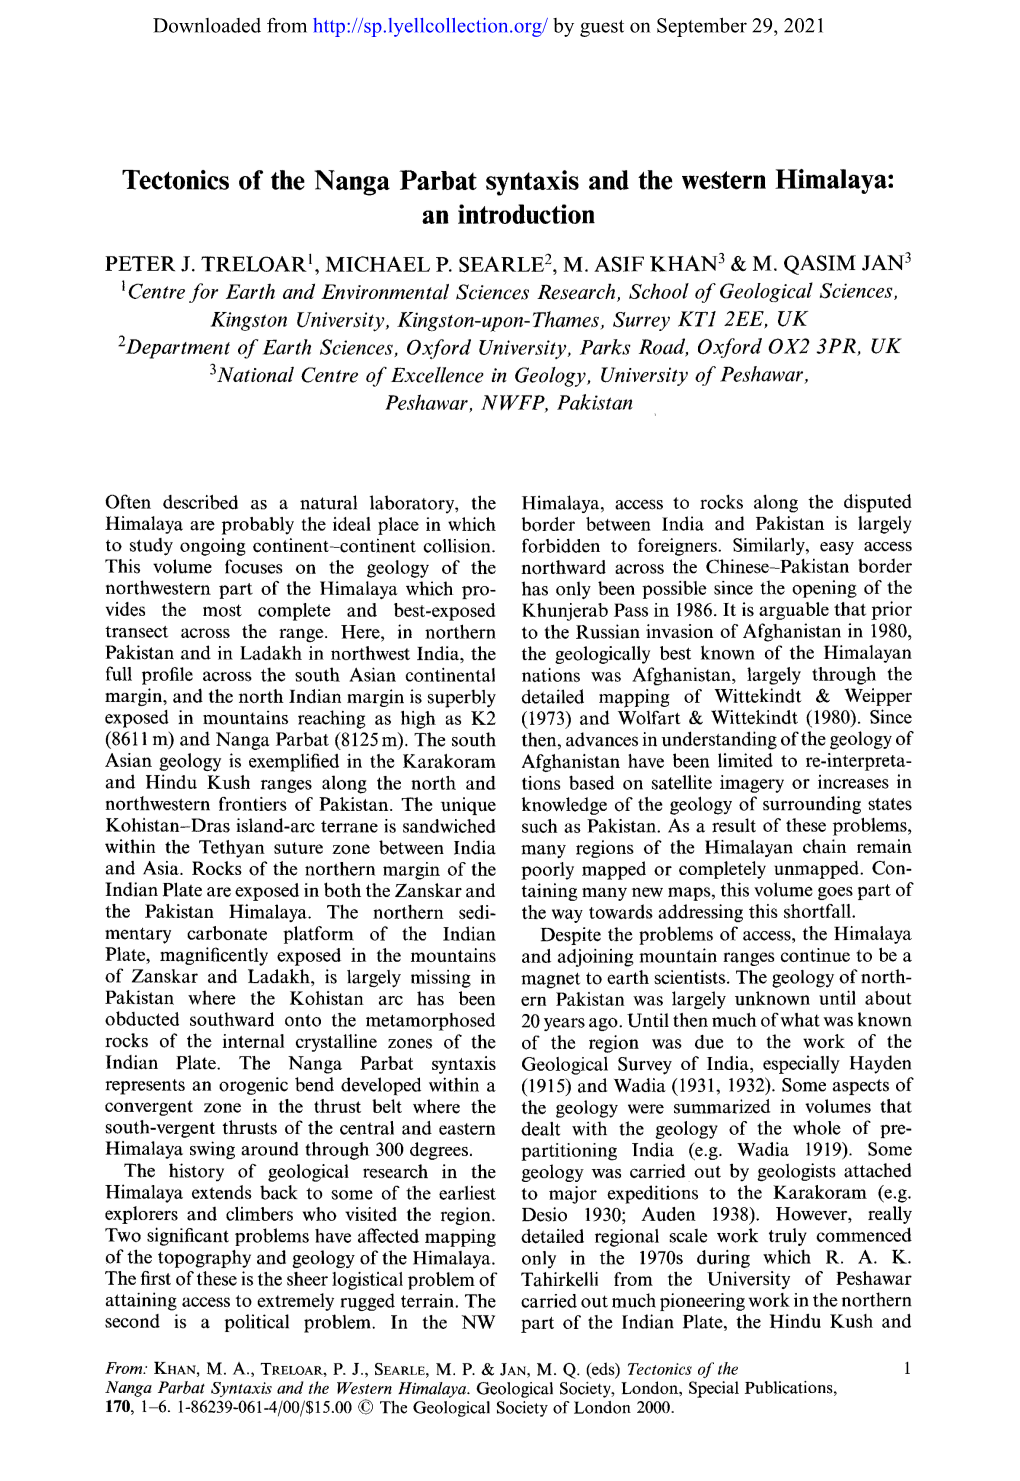 Tectonics of the Nanga Parbat Syntaxis and the Western Himalaya: an Introduction